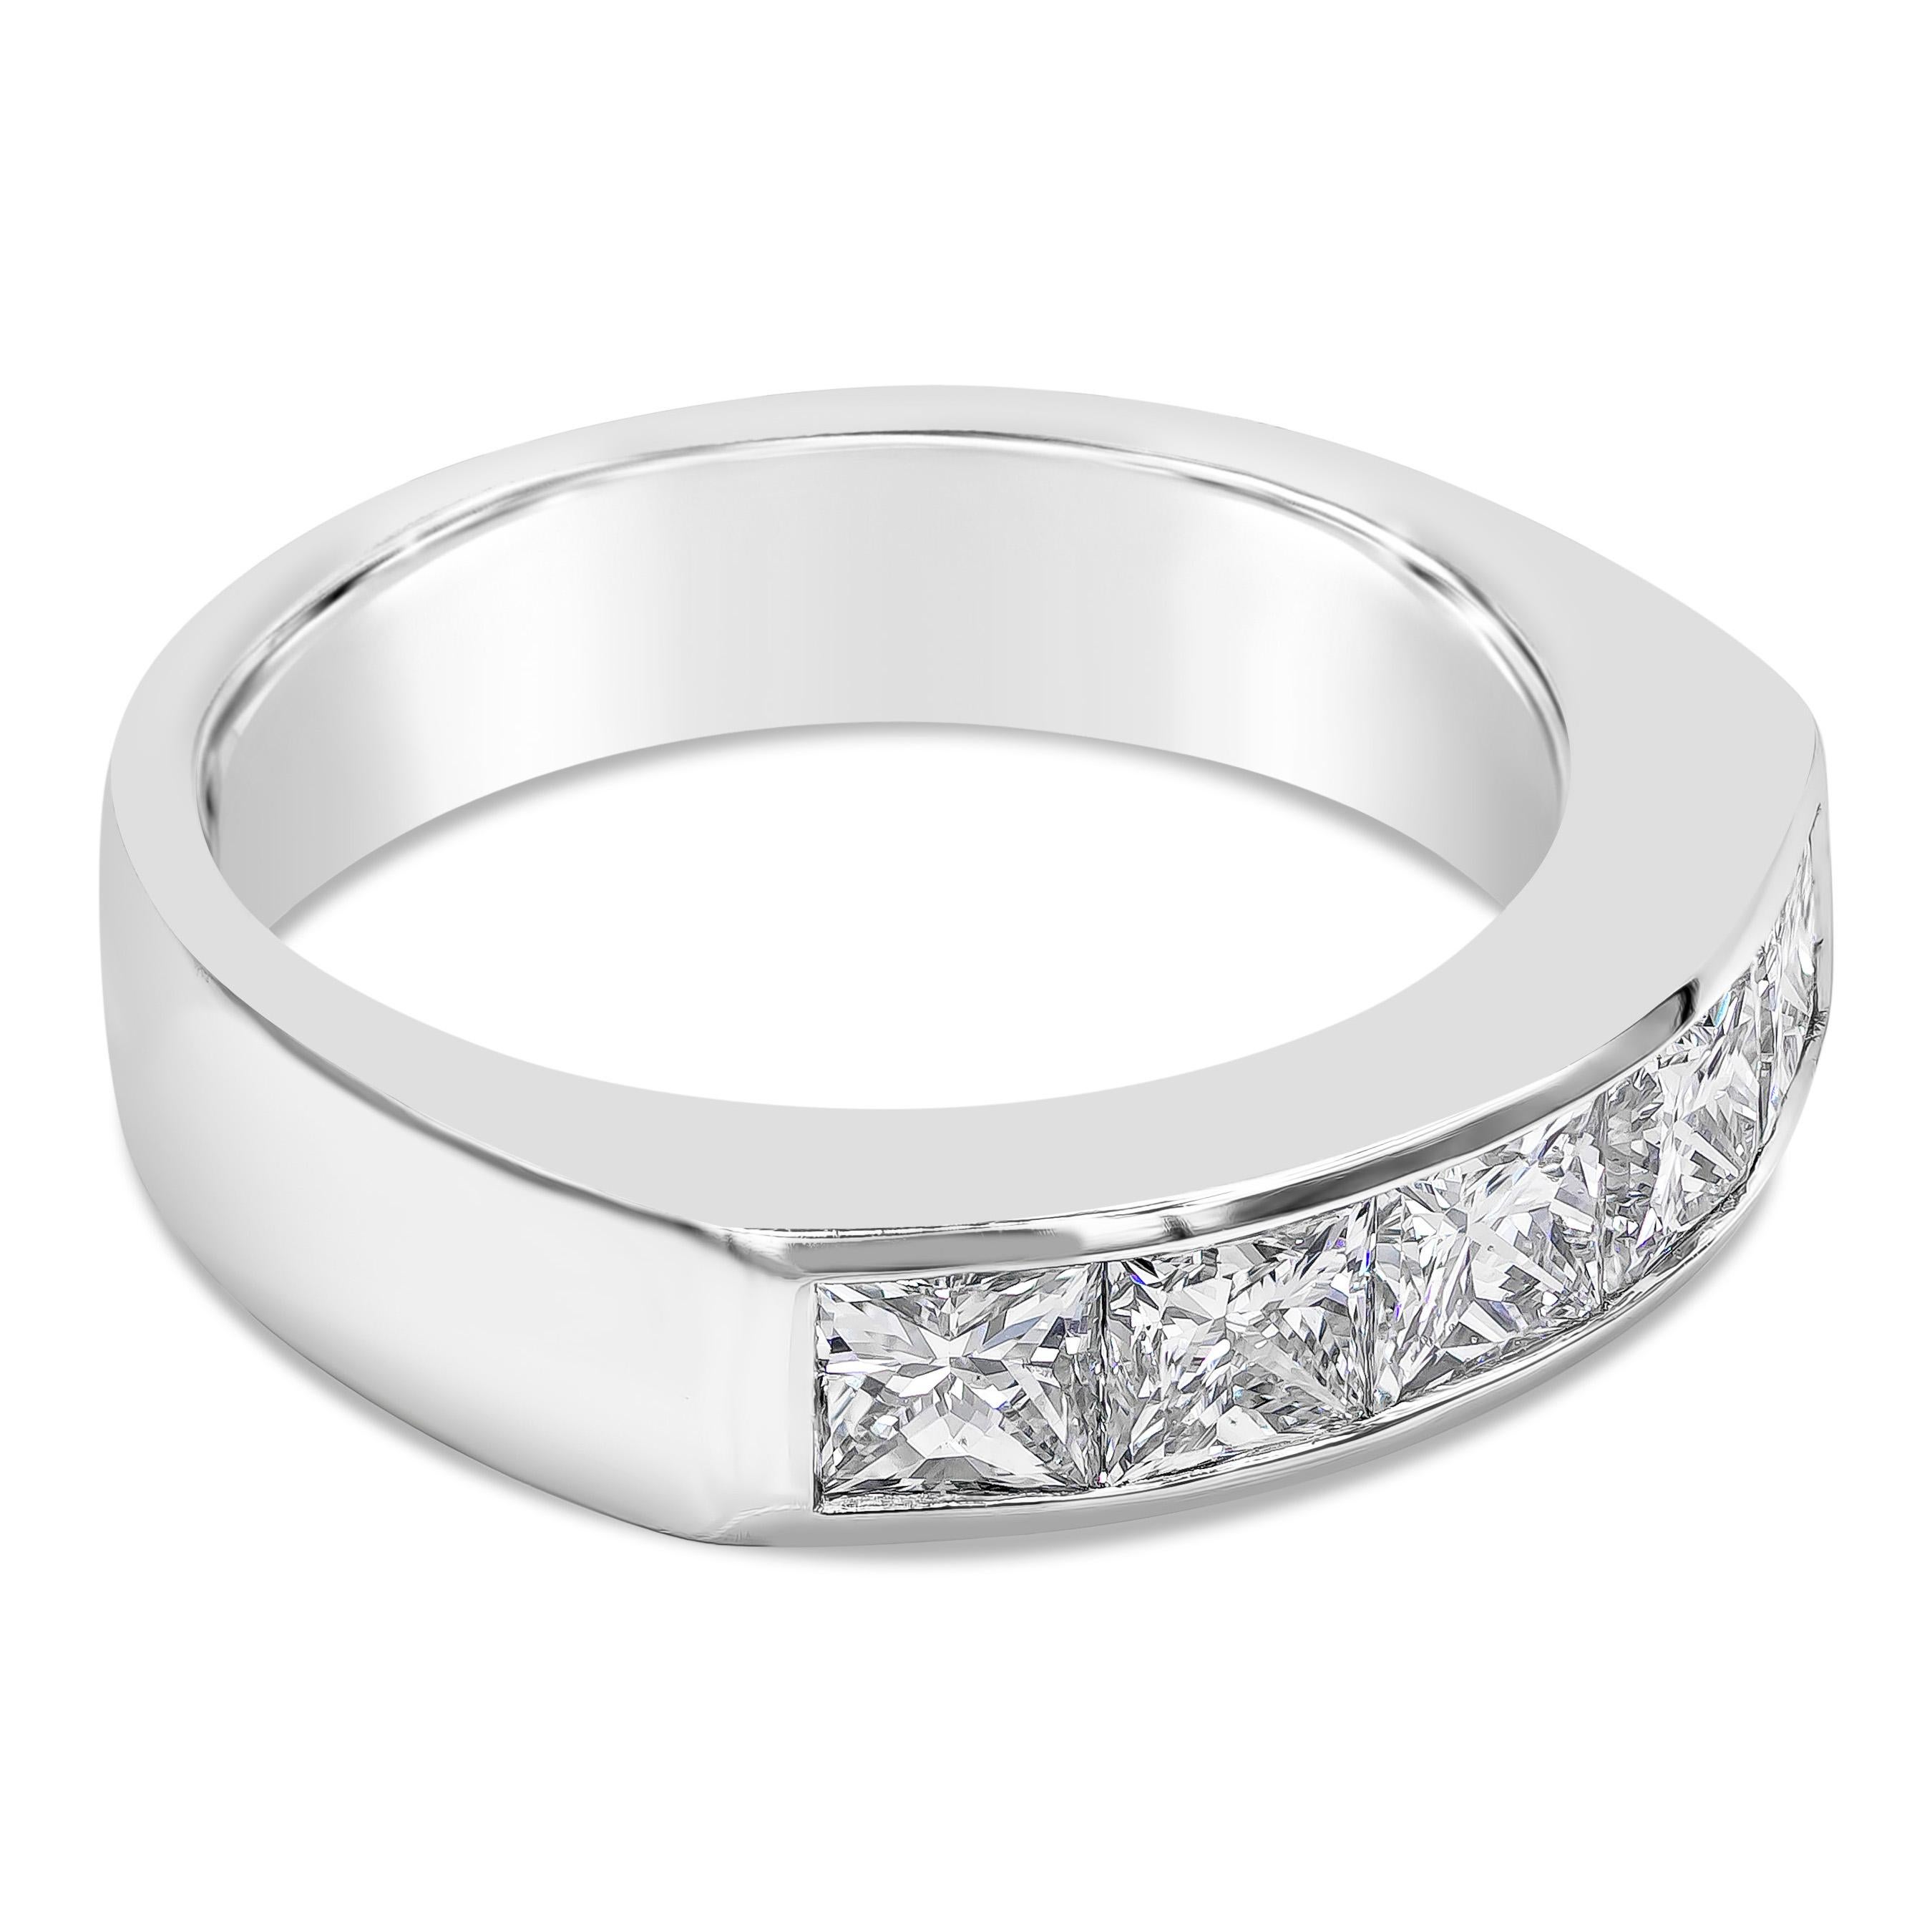 A subtle yet distinctive men's wide wedding band showcasing five stone princess cut diamonds weighing 2.93 carats total, channel set in a polished platinum mounting. Size 12 US resizable upon request and 5.91 mm in width.

Style available in